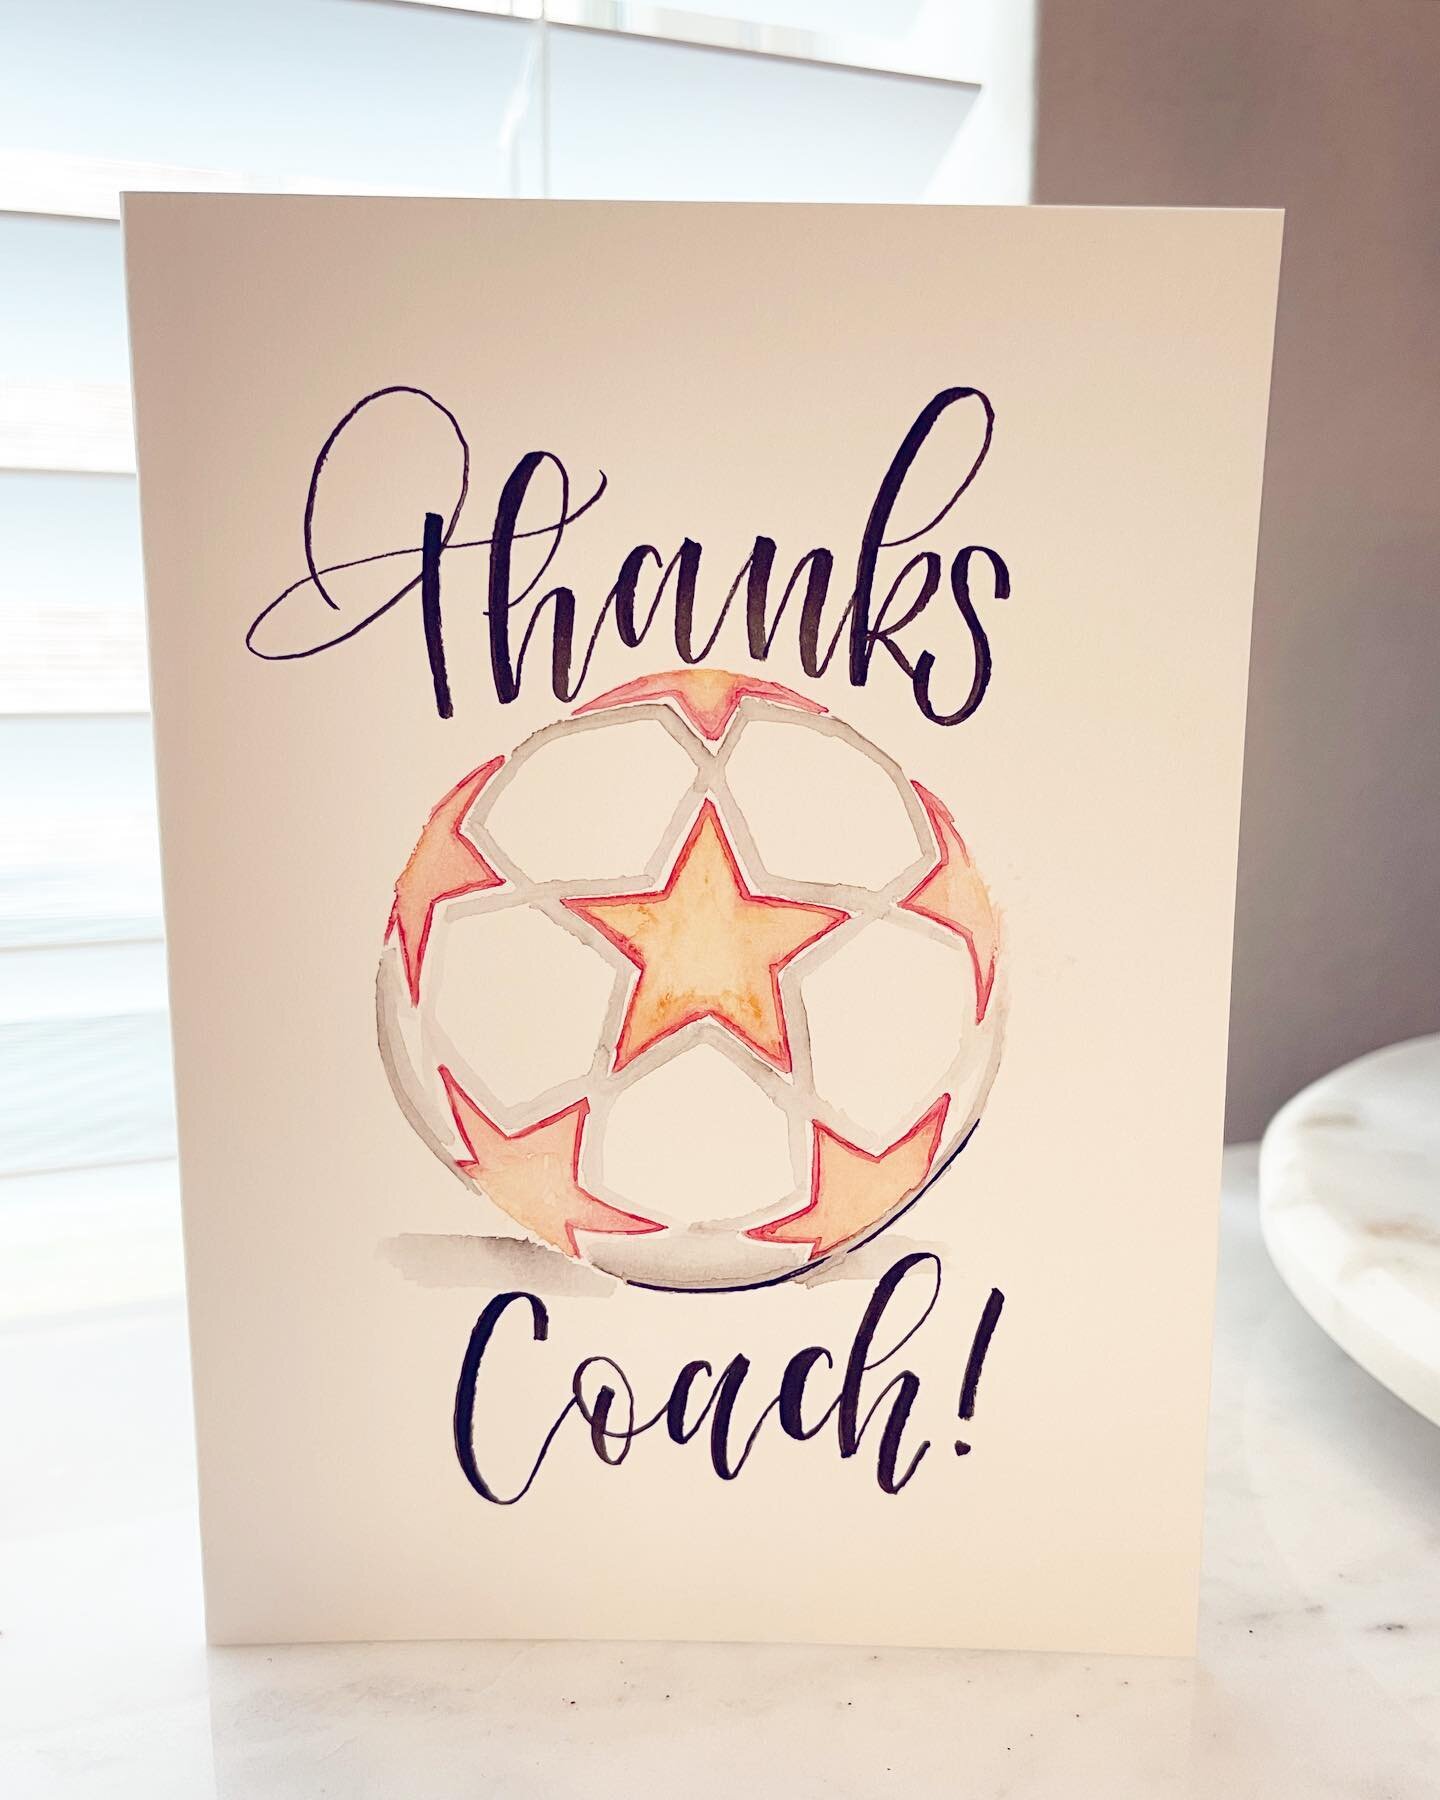 Wrapped up another season of soccer with the Super Kitties!
And another special guest to cheer us on!! ☺️❤️⚽️😻
&bull;
#lifebeautifullydesigned
#watercolor #handpainted #thankyoucard #handmadecard #thankyoucoach #soccer #adidasmatchball #watercolorar